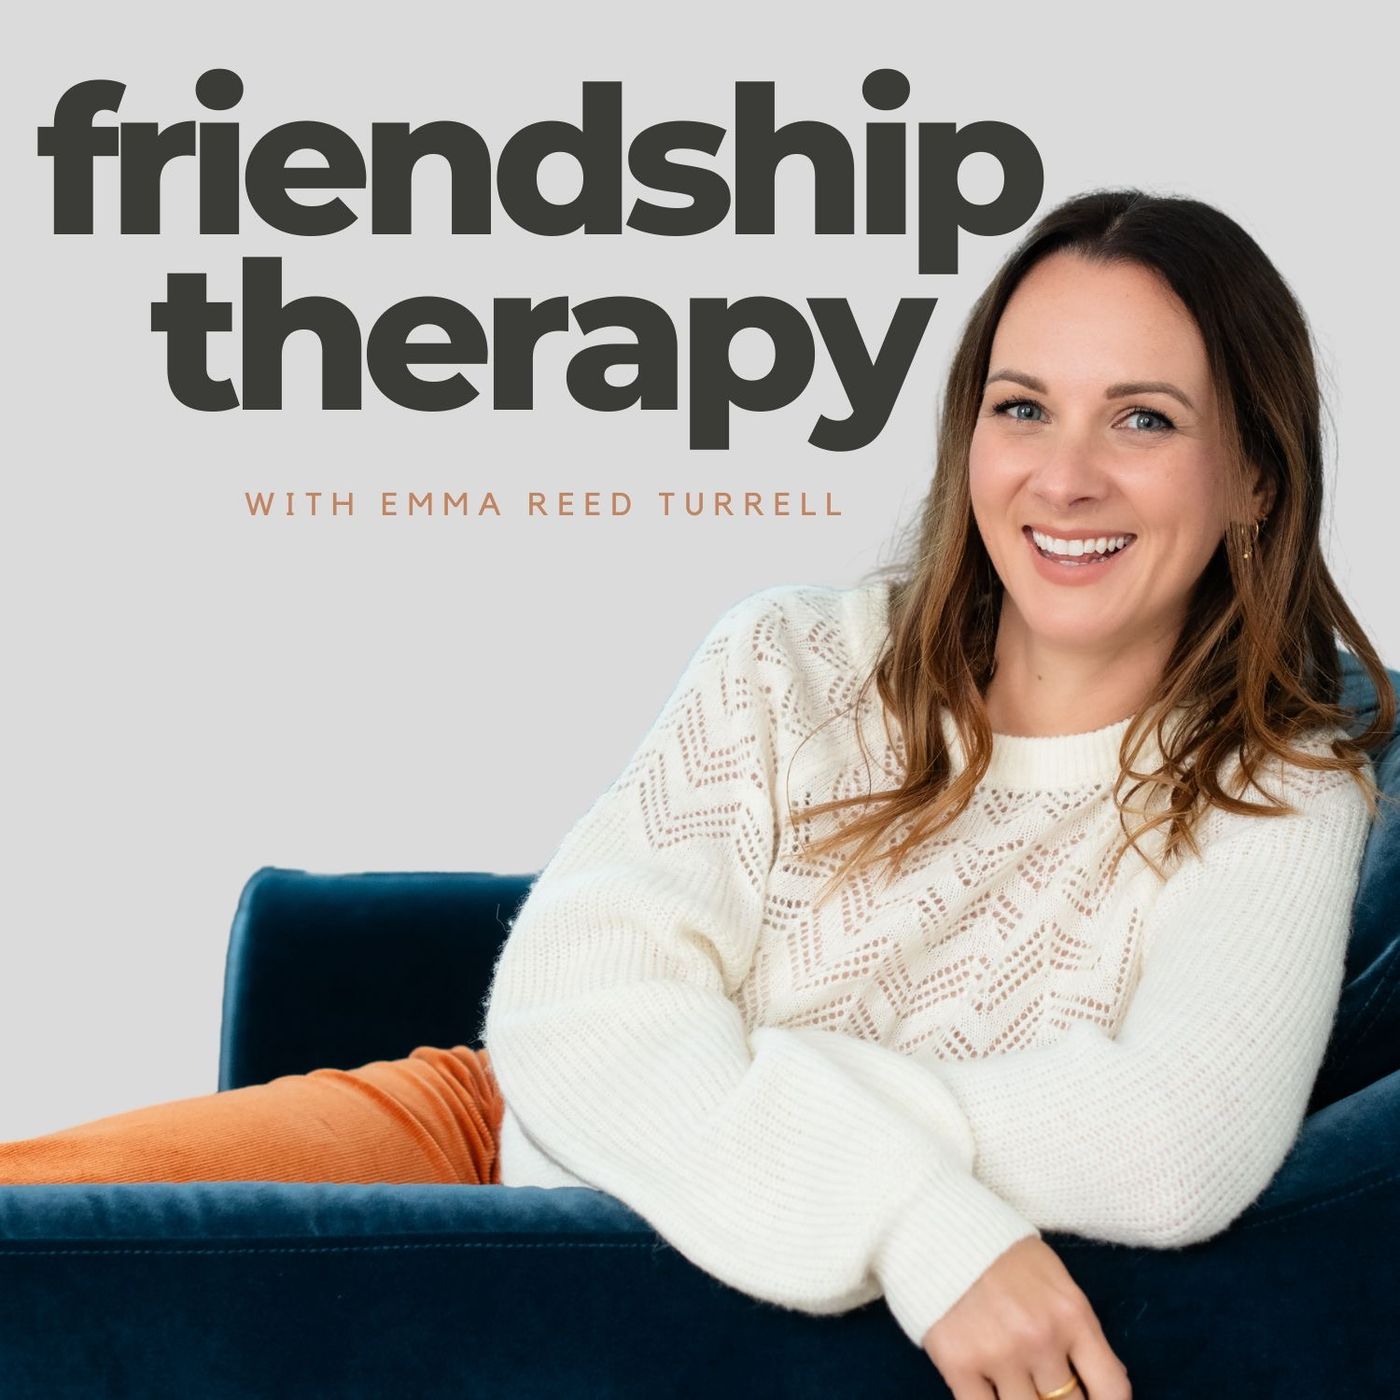 S1, Ep 7 Friendship Therapy: Neurodiversity in Friendship - a unique perspective on dyspraxia and how it can impact friendship